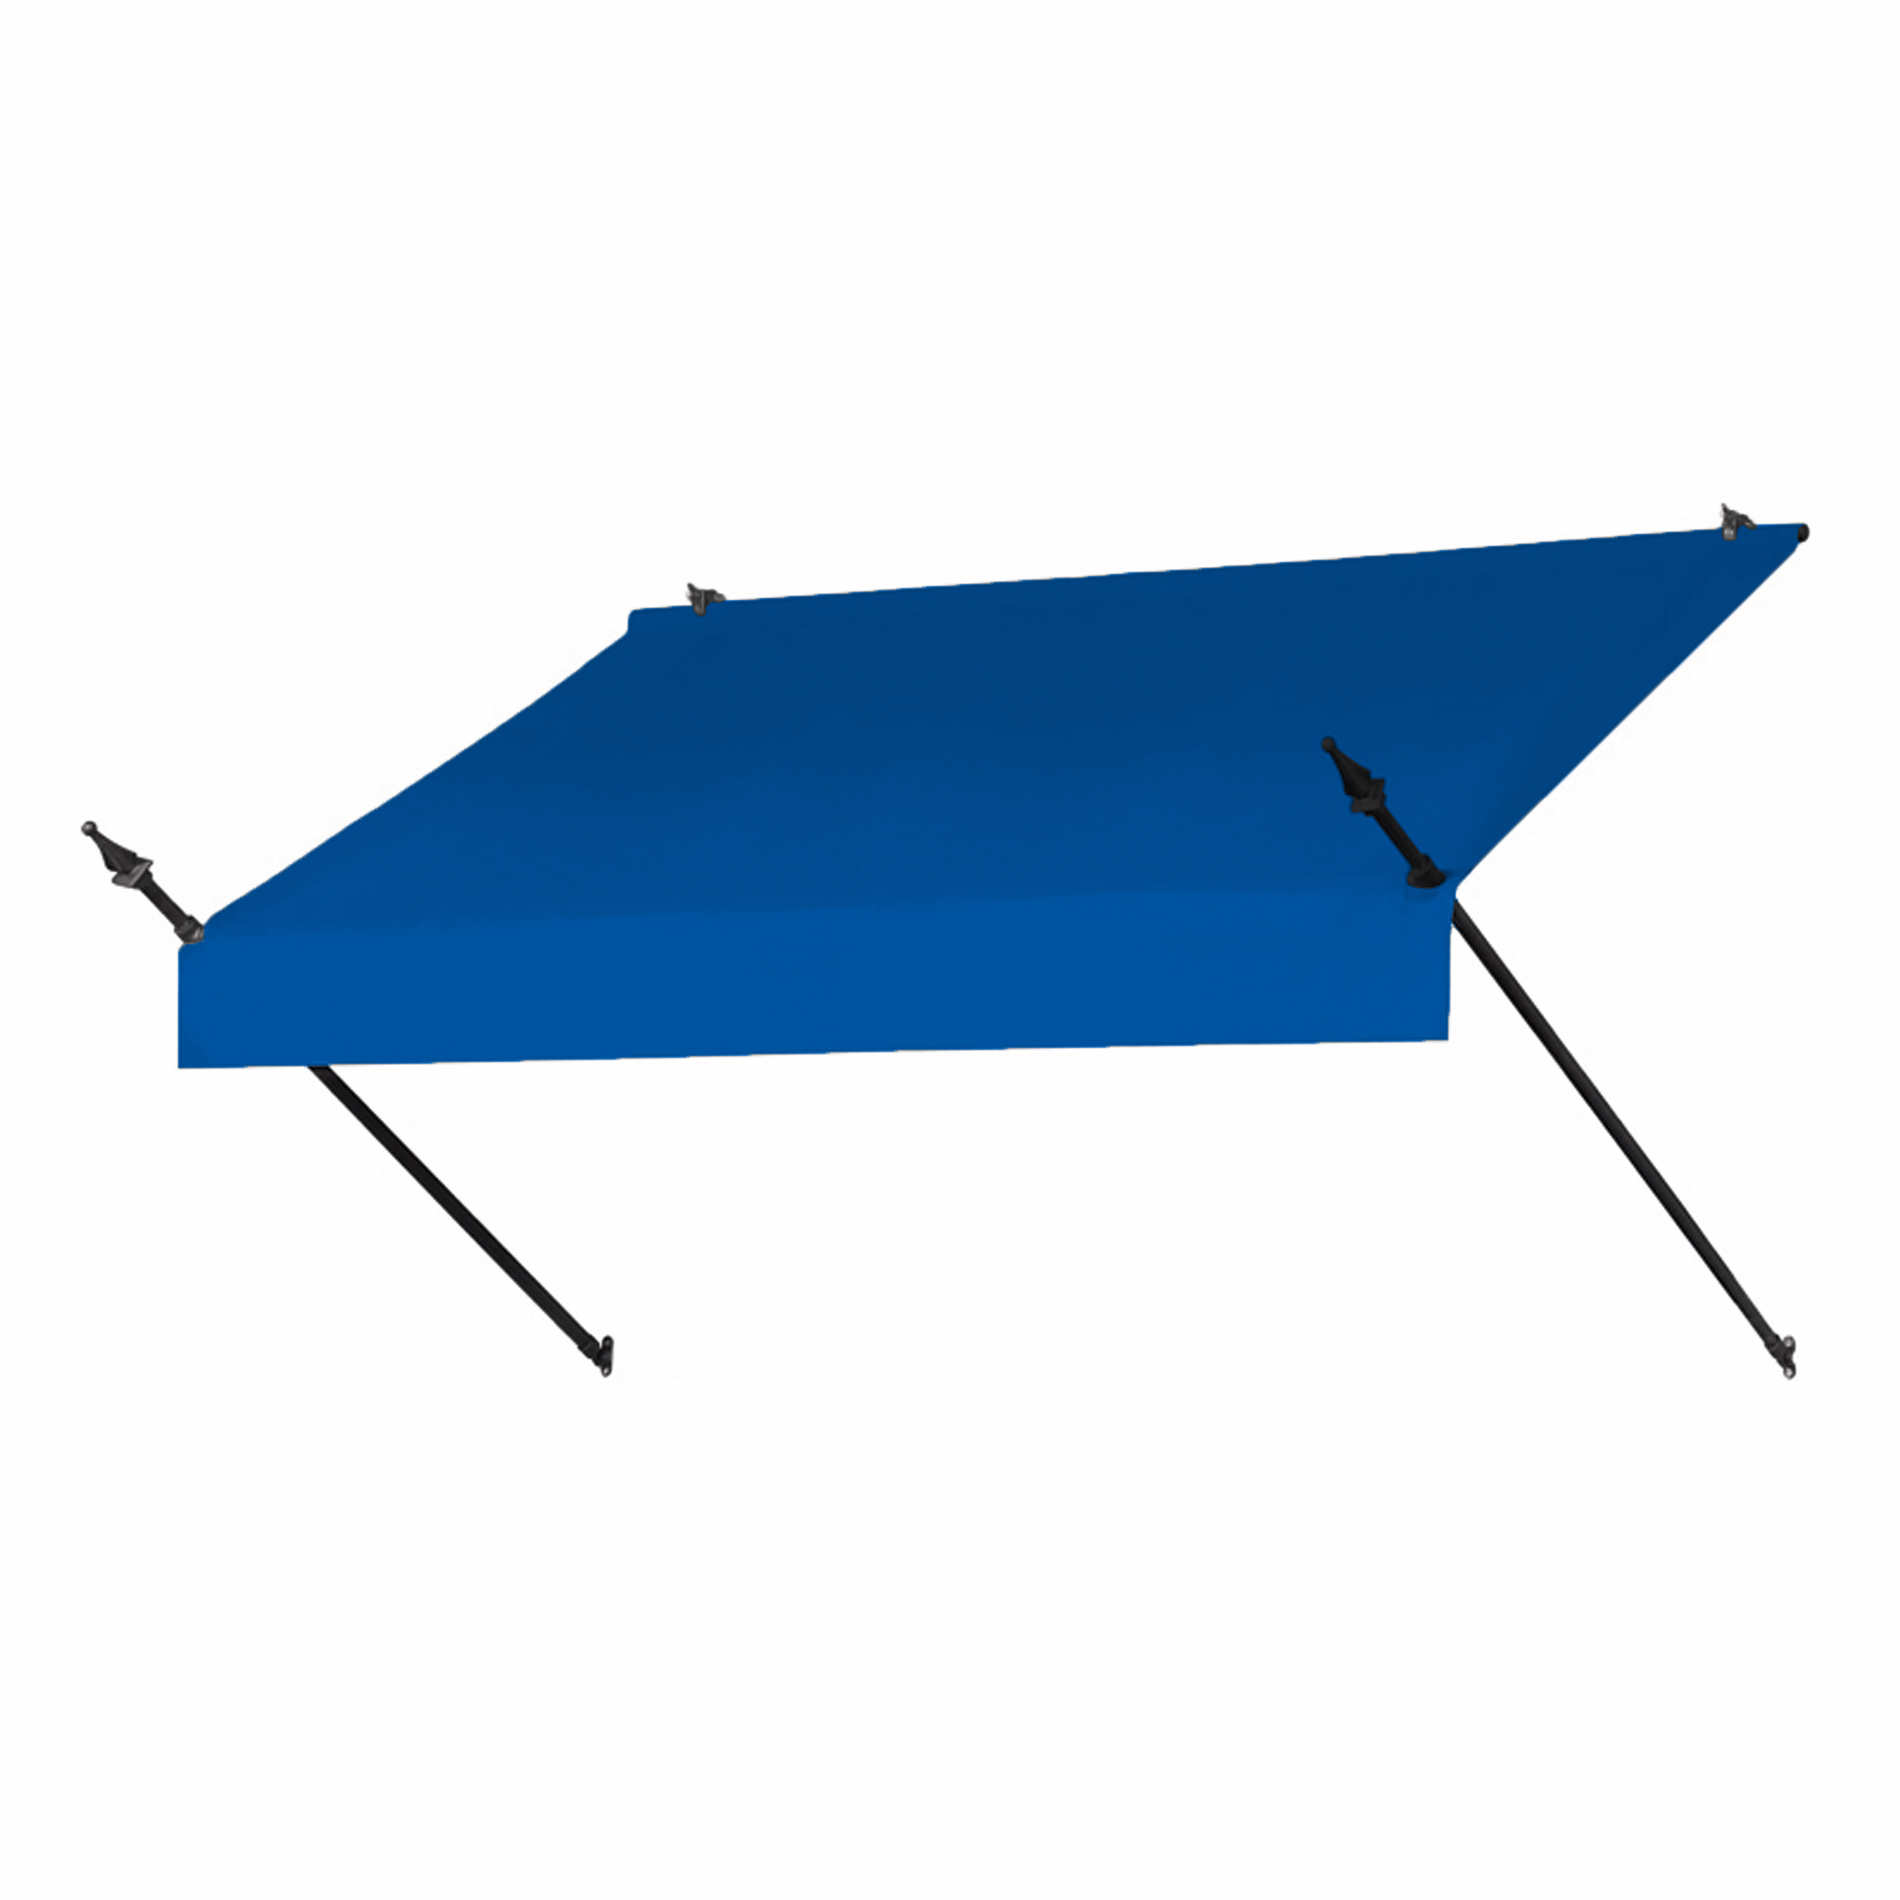 6' Designer Awnings in a Box Pacific Blue